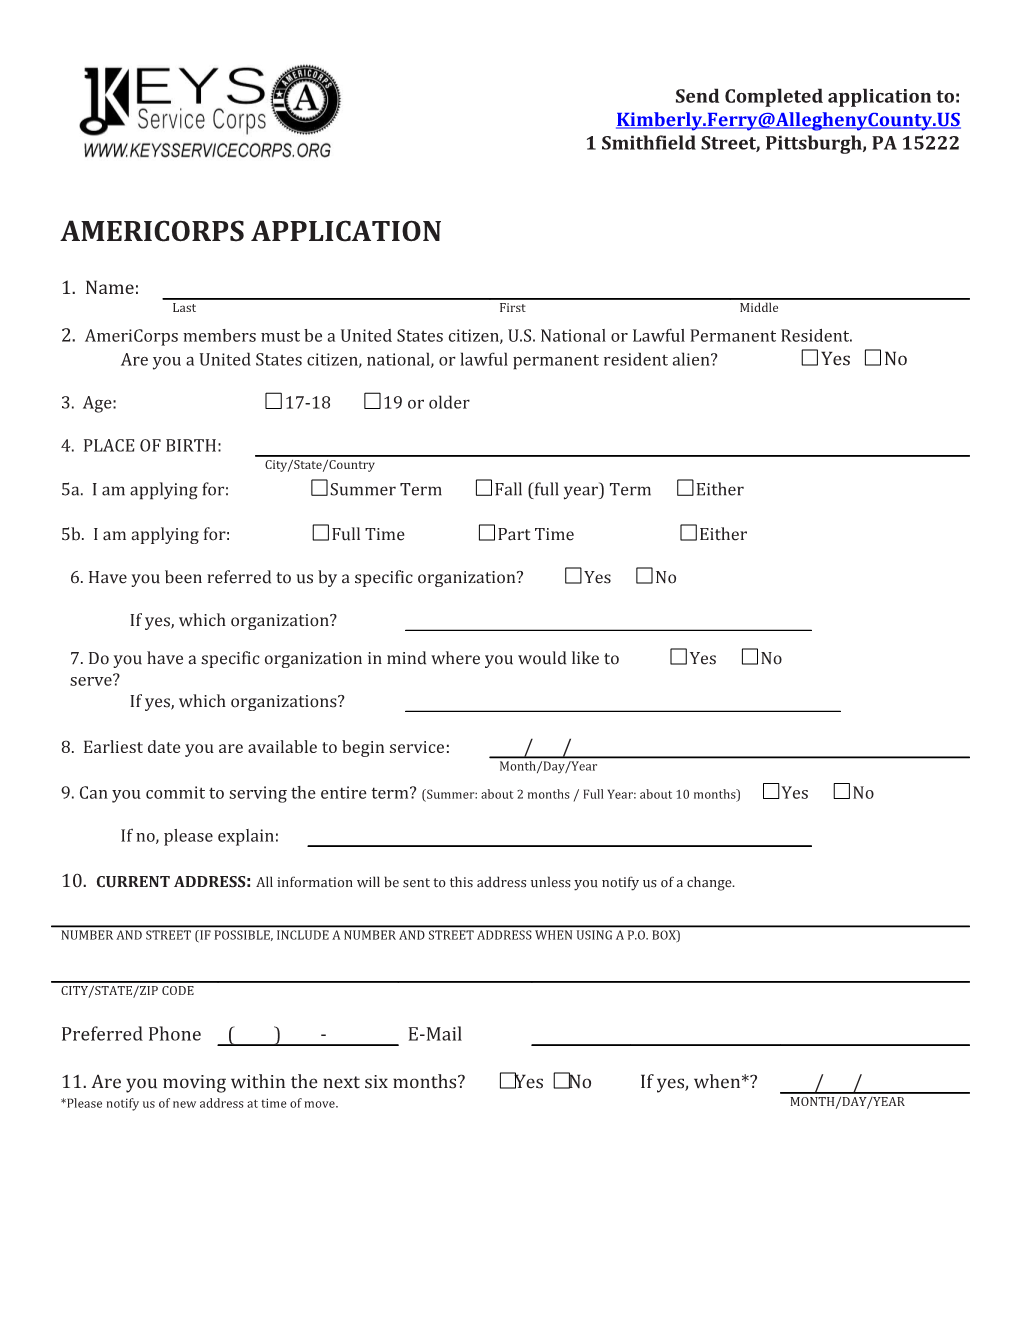 Send Completed Application To